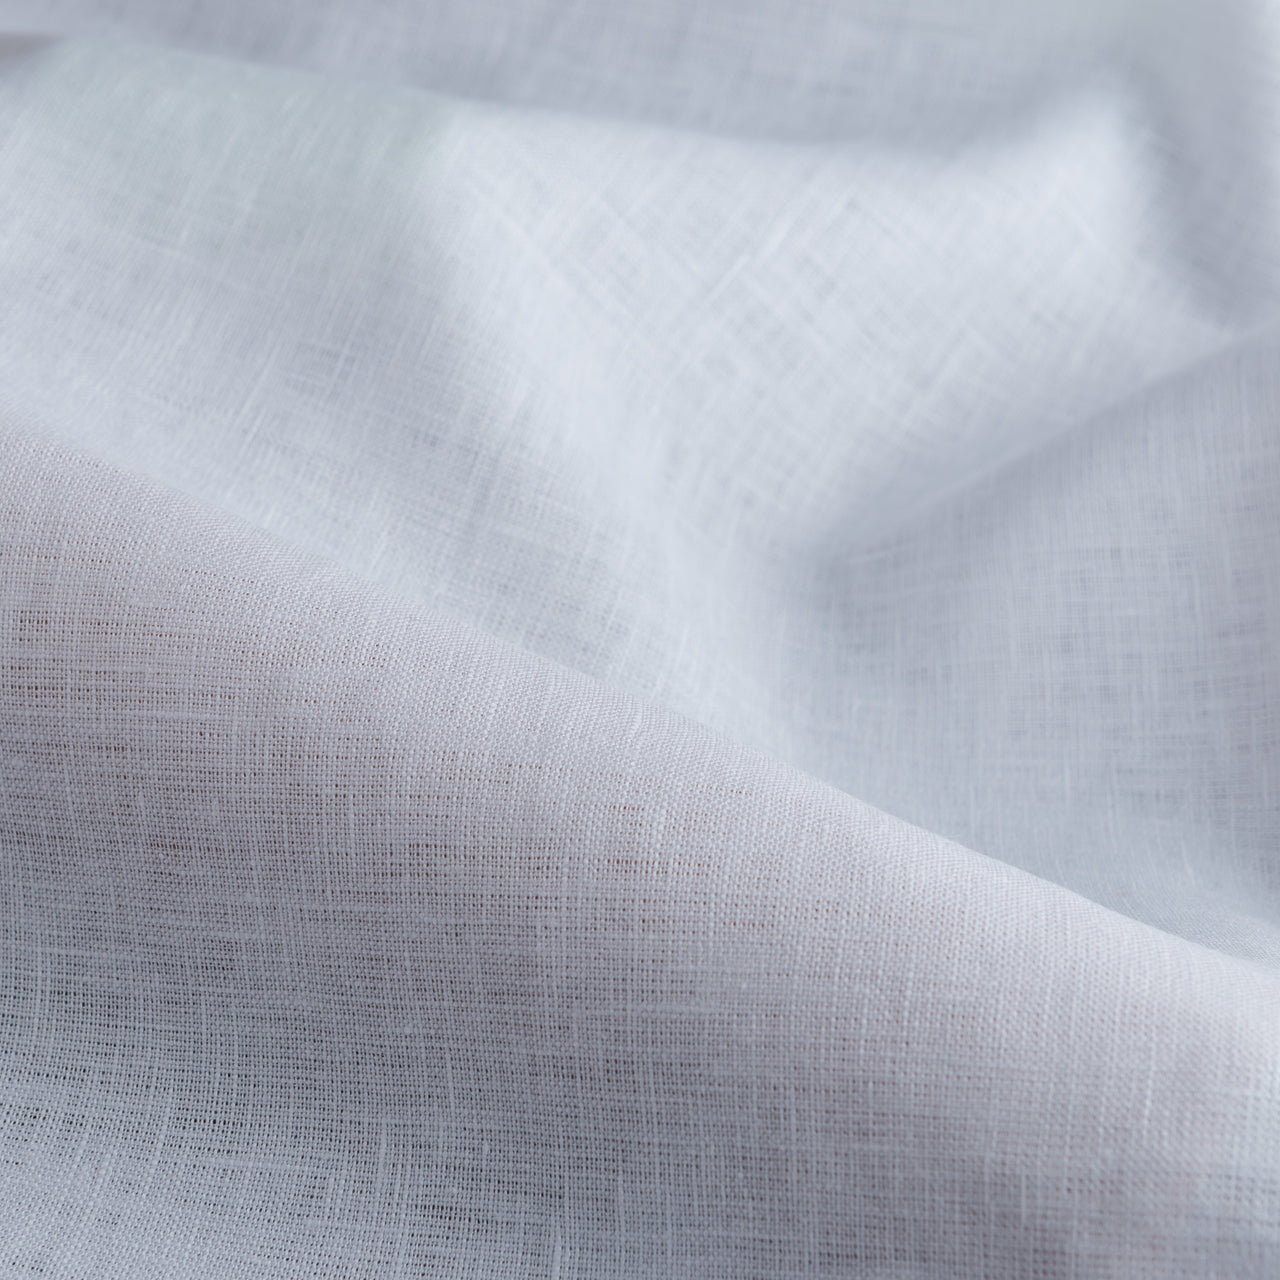 White Medium Weight Linen Fabric by the Yard - 100% French Natural - Width 52”- 106”